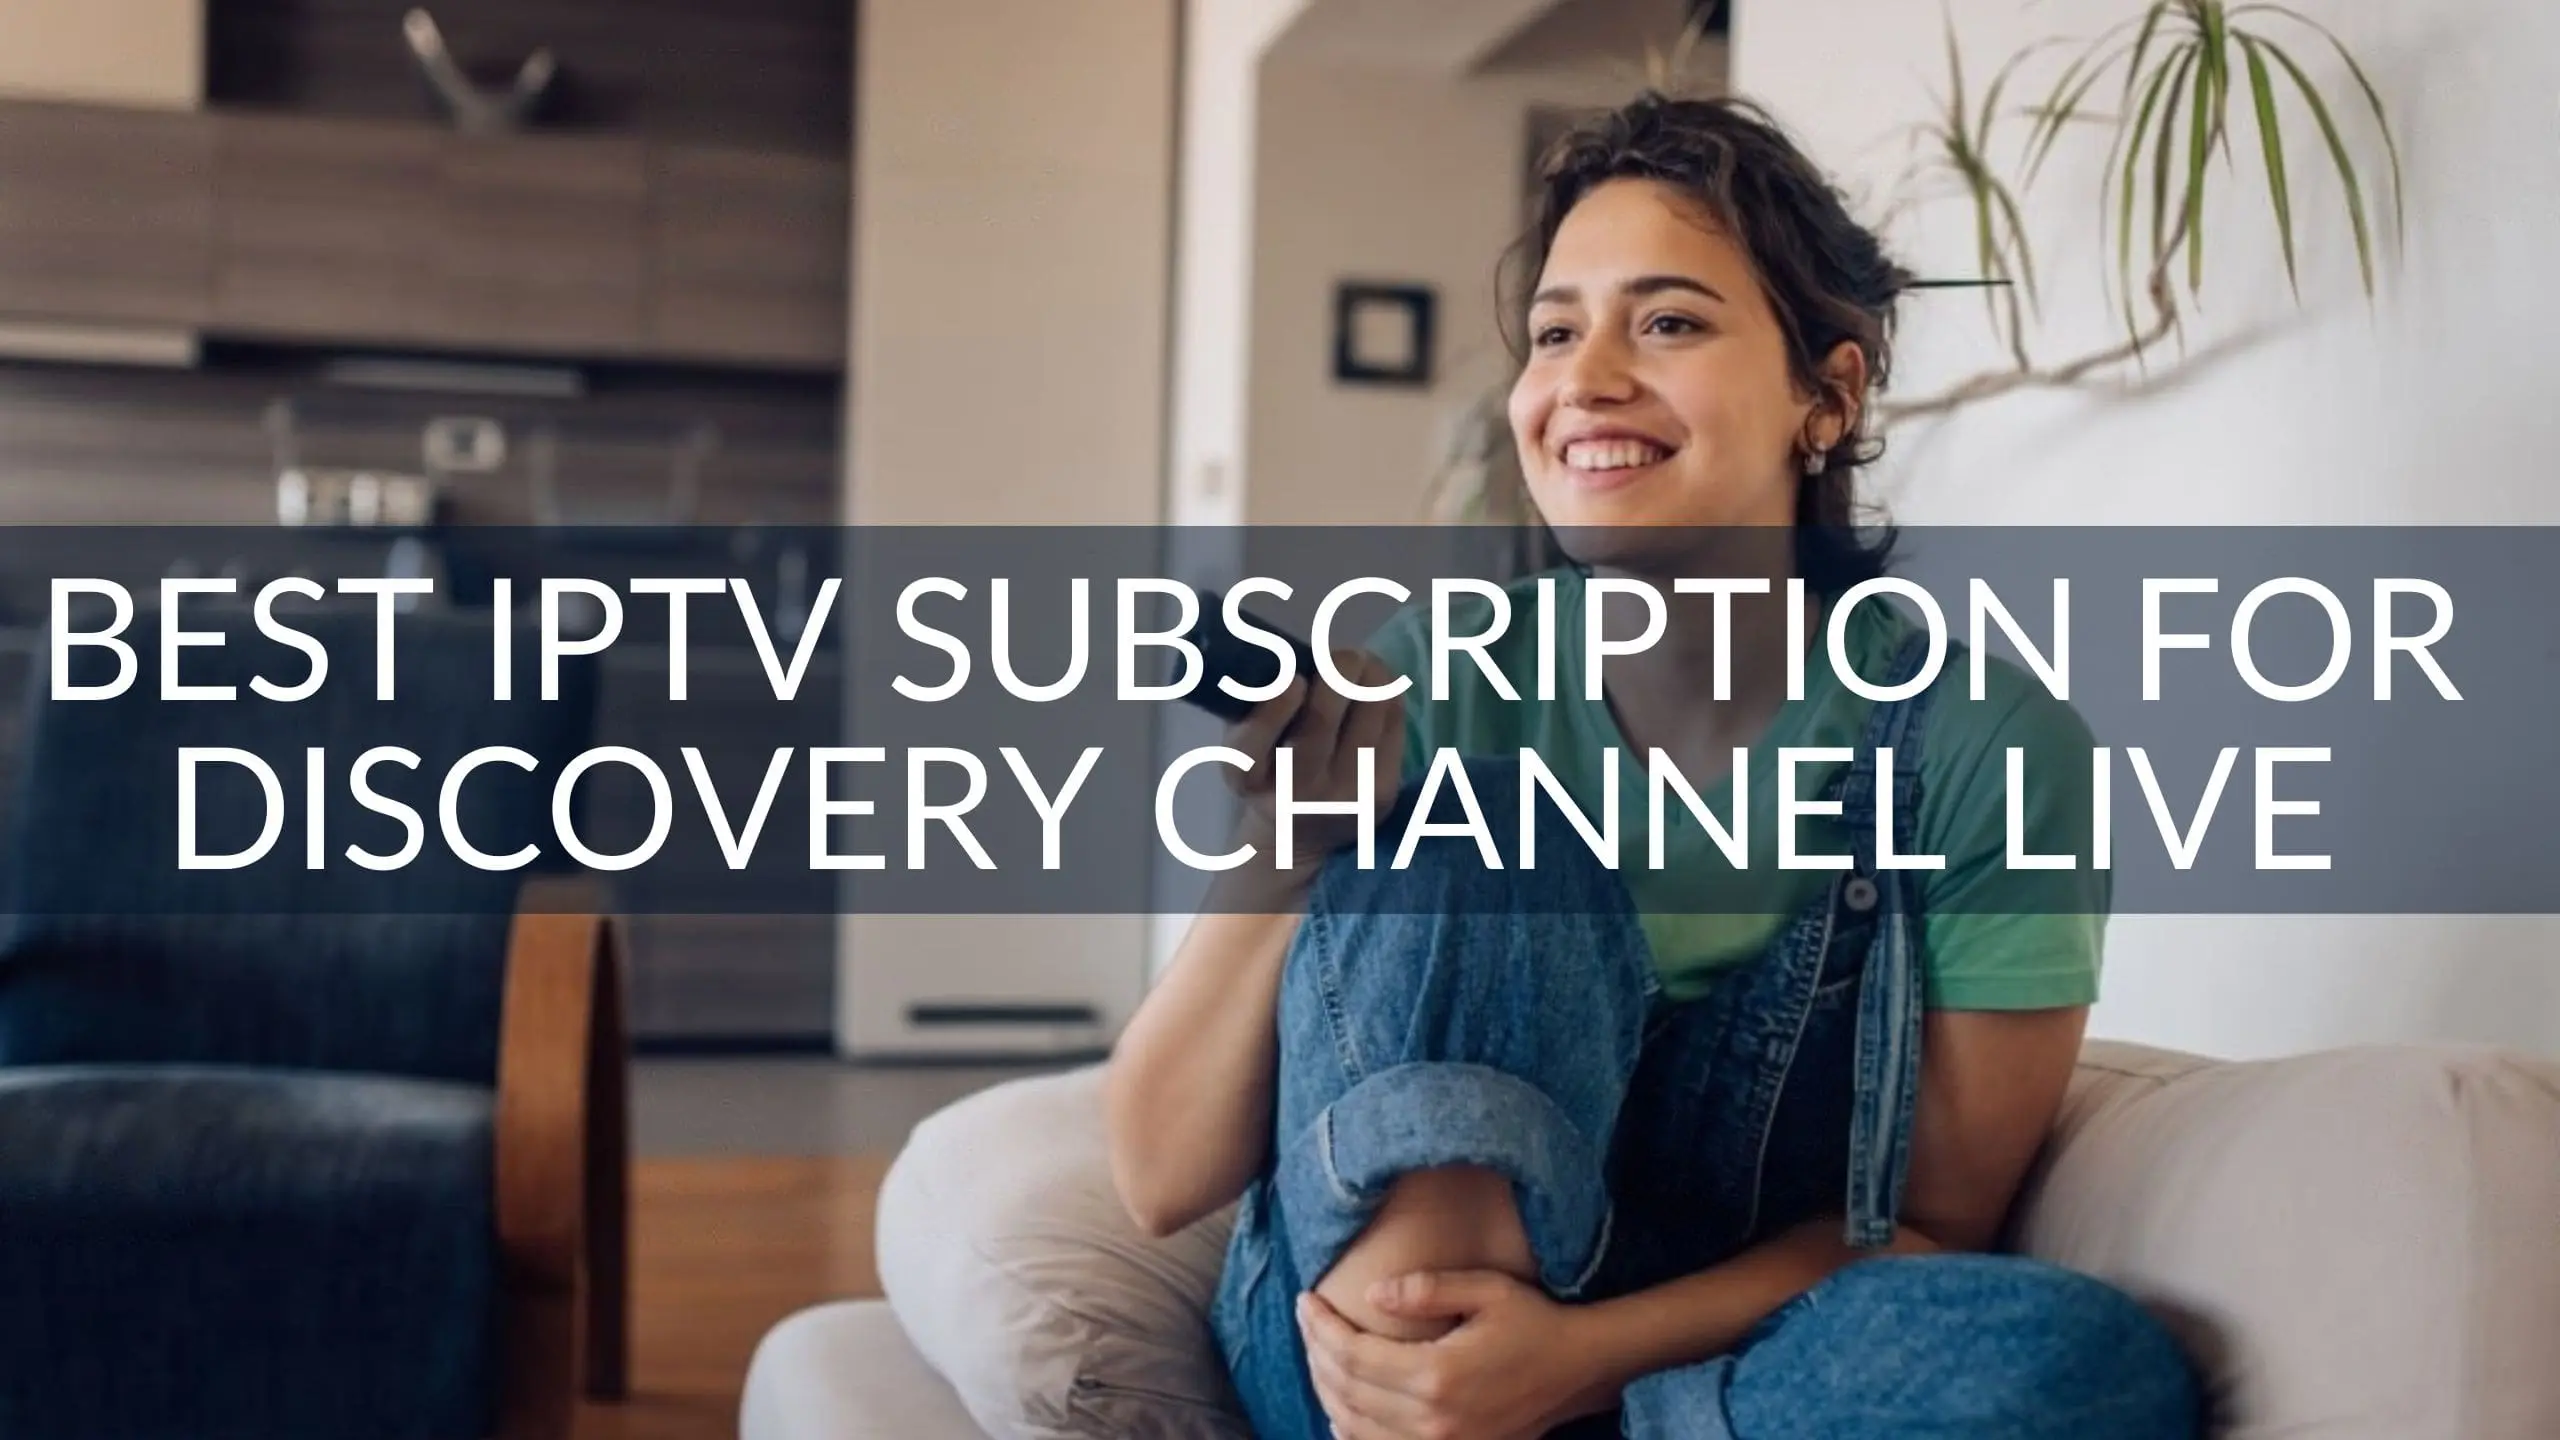 Best IPTV Subscription for Discovery Channel Live